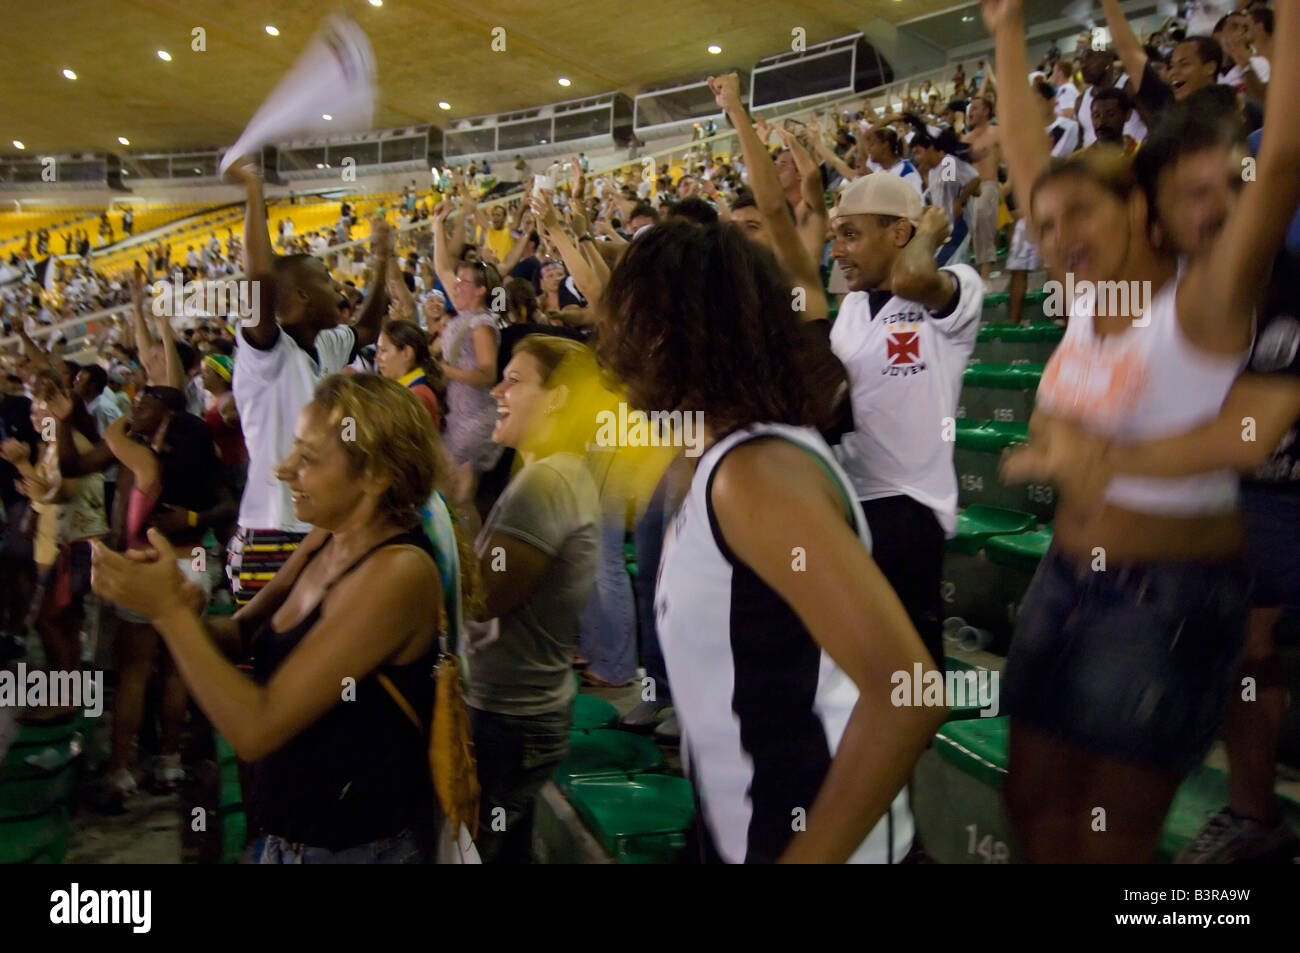 Local and tourists cheer as a goal is scored at a football match at the Maracana stadium in Rio between Vasco and Fluminense. Stock Photo